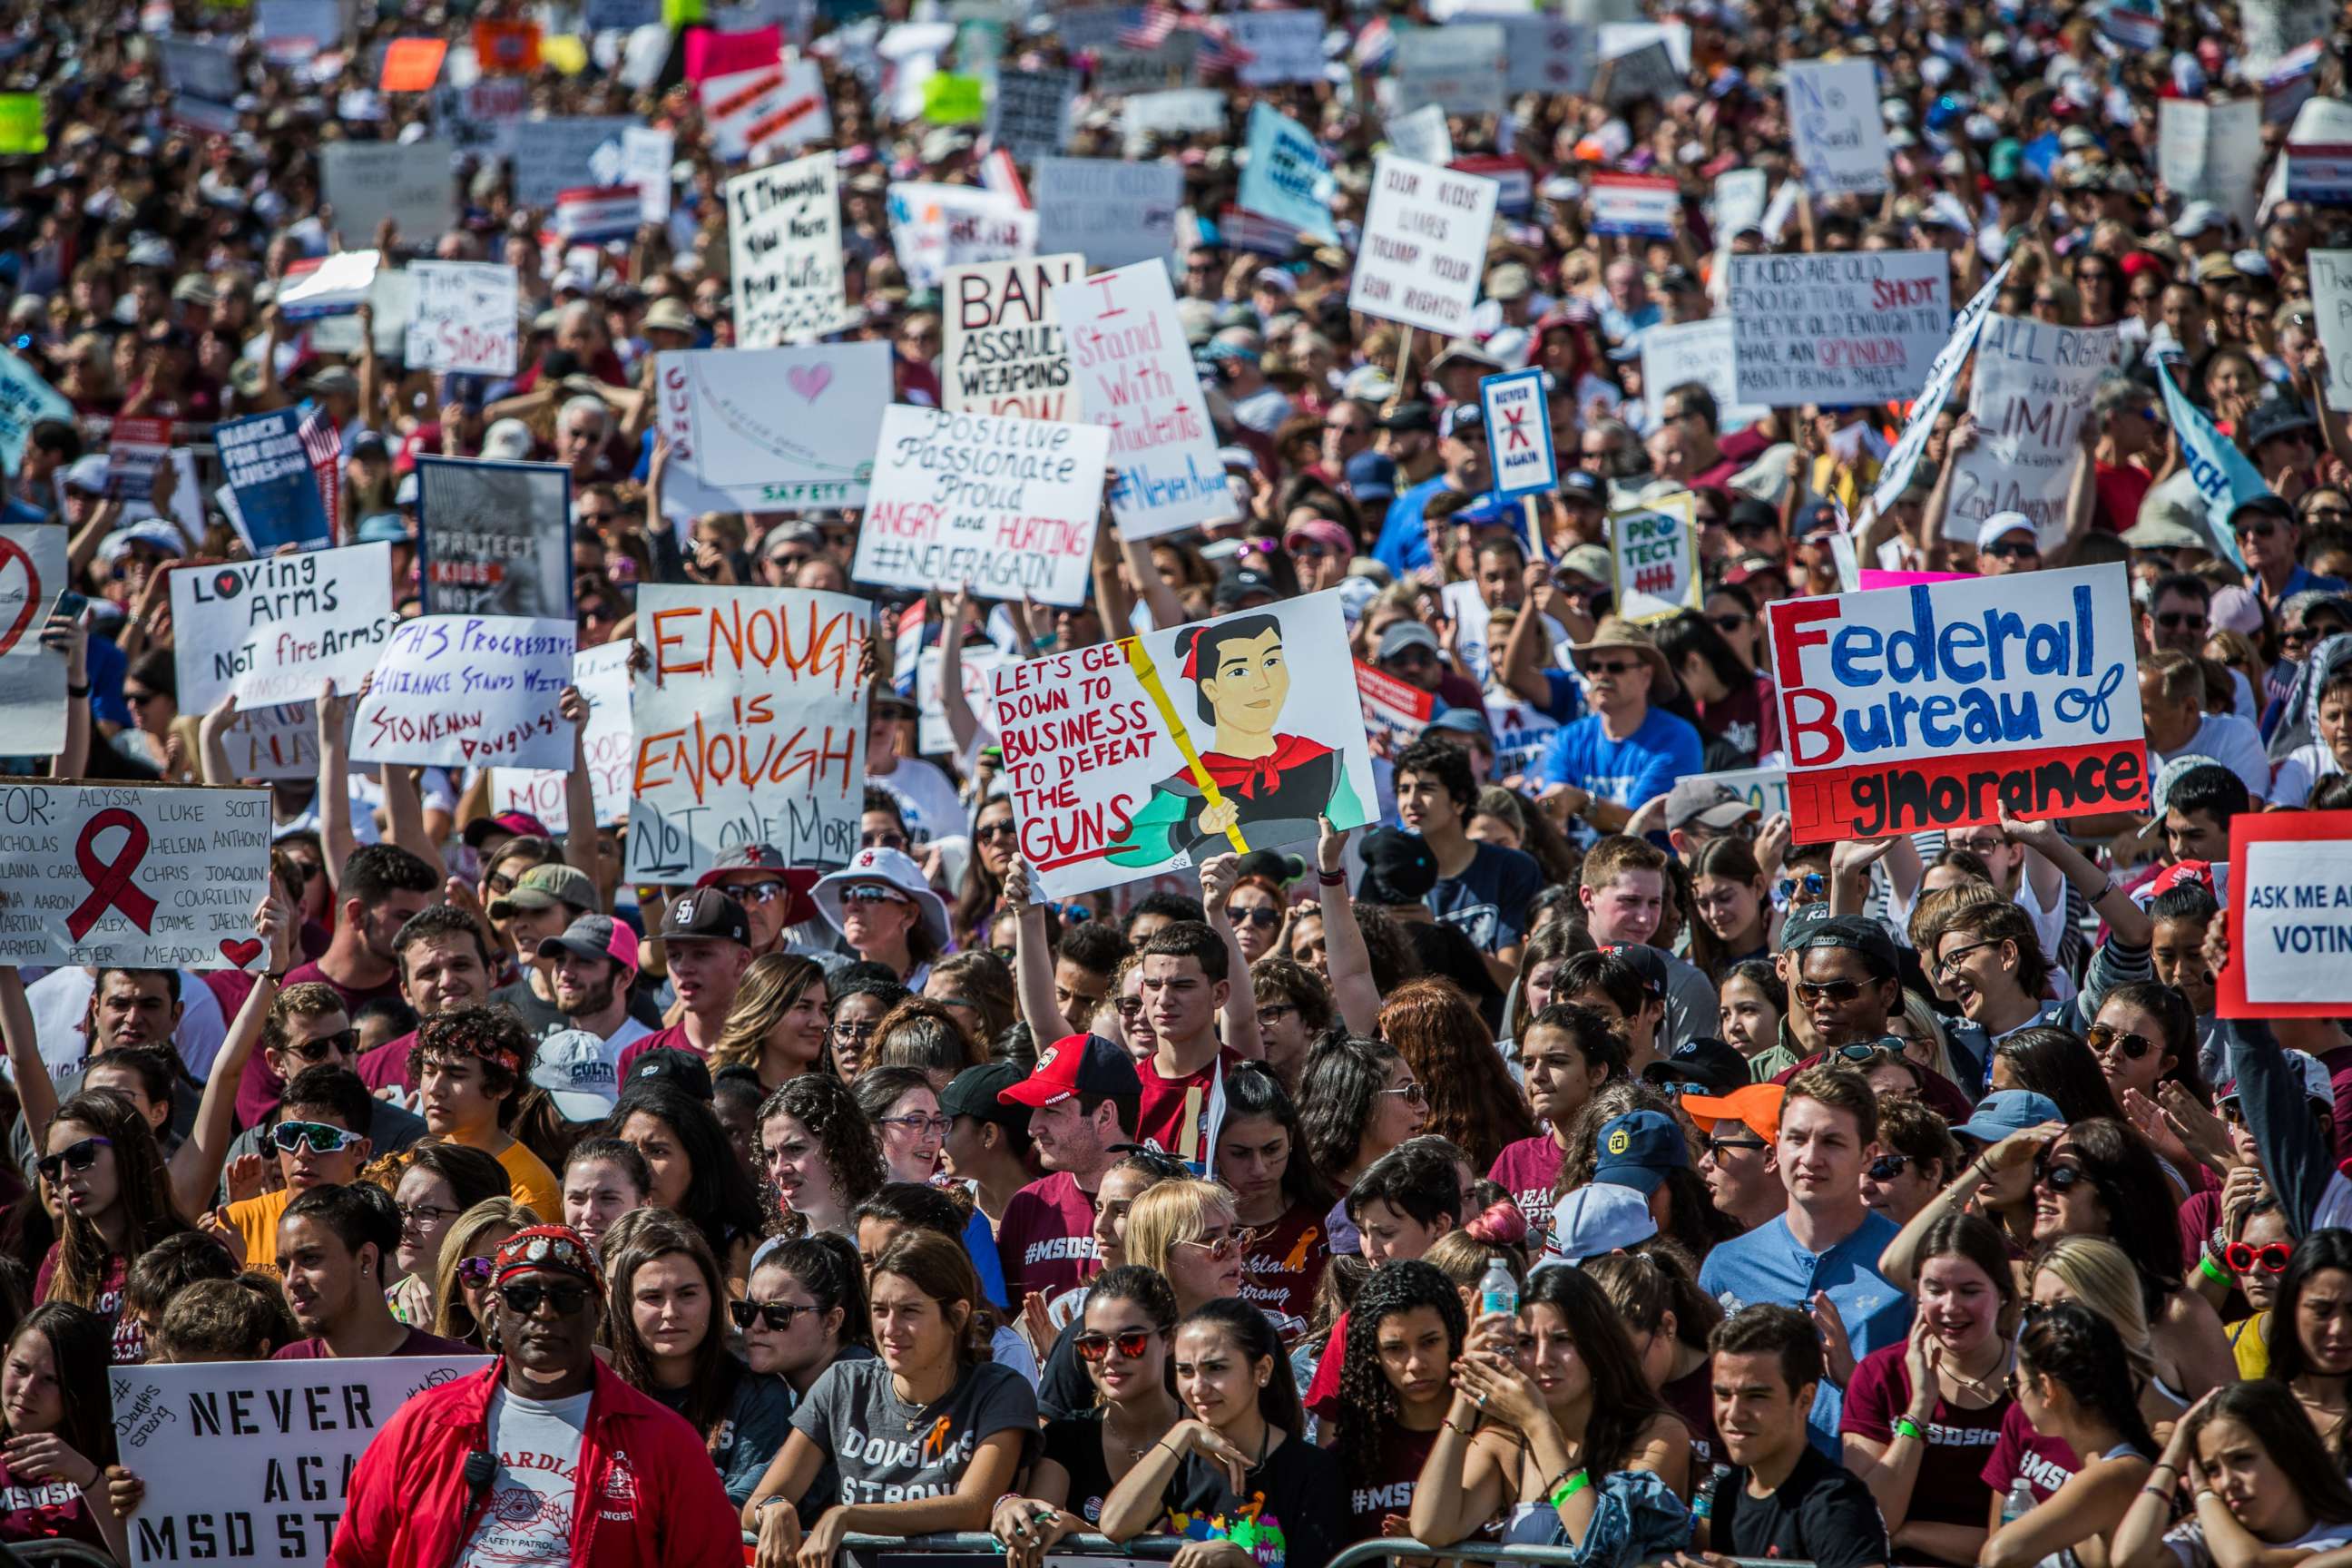 PHOTO: Protesters participate in March for Our Lives rally in Parkland, Fla., March 24, 2018.